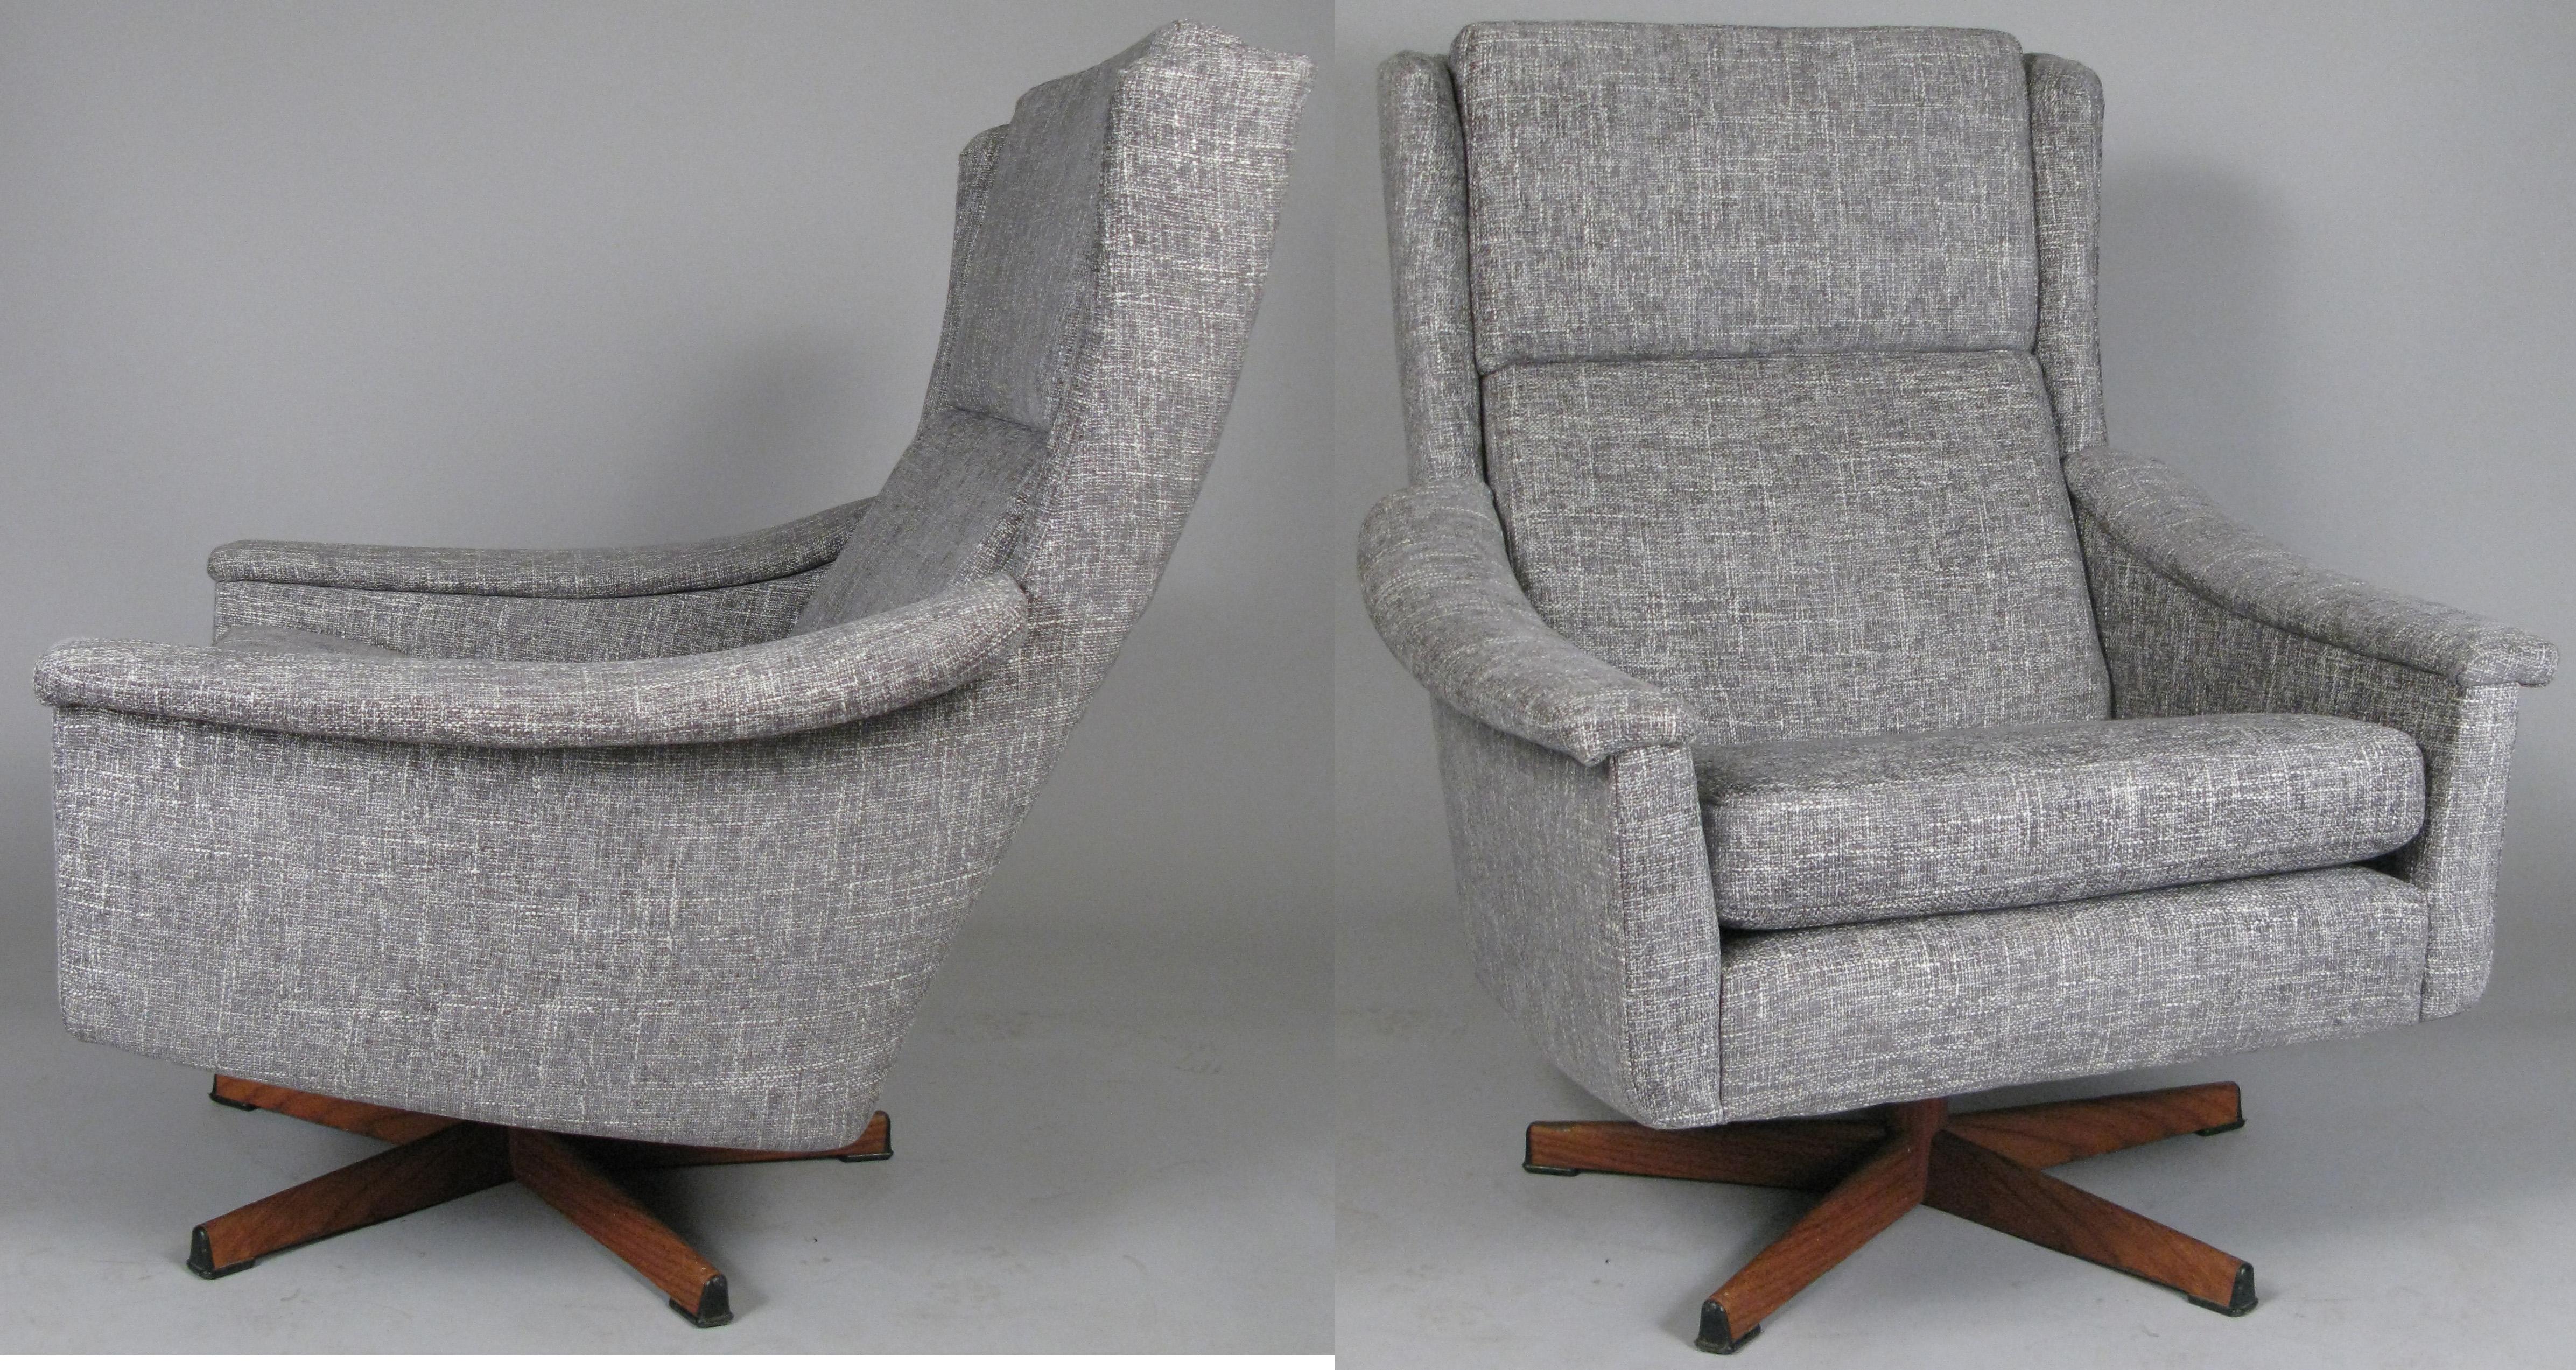 A beautiful pair of vintage 1950s high back lounge chairs, purchased from Illums Bollighus, with swivel bases of steel with wood veneer overlay. Incredibly comfortable, with curved arms and high cushioned backs. These have just been reupholstered in